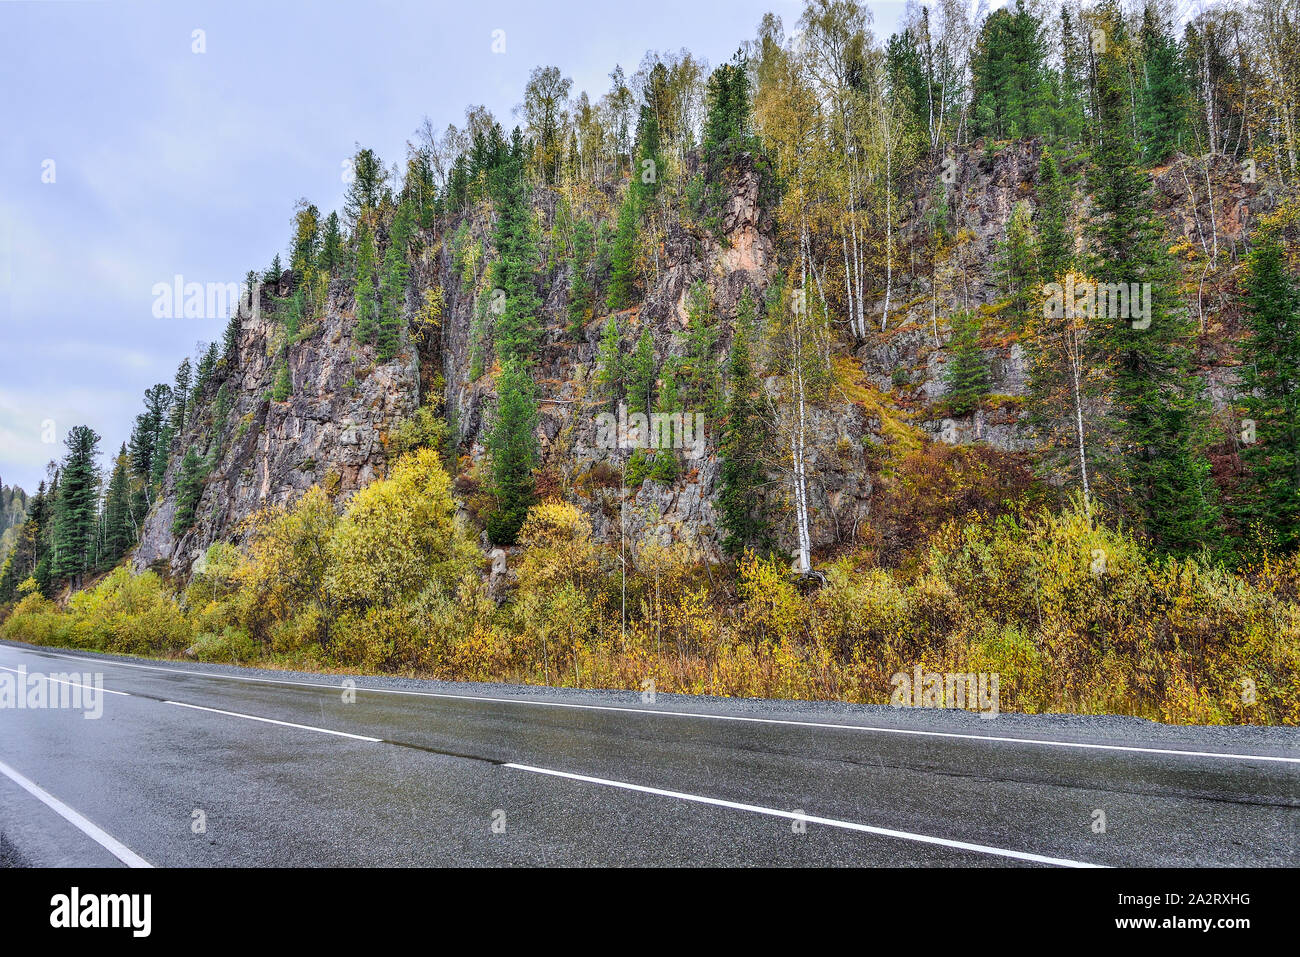 Autumn Scenic Landscape - Turn of a mountain road under a rocky cliff in the midst of a brightly colored autumn forest covering the mountains. Golden Stock Photo